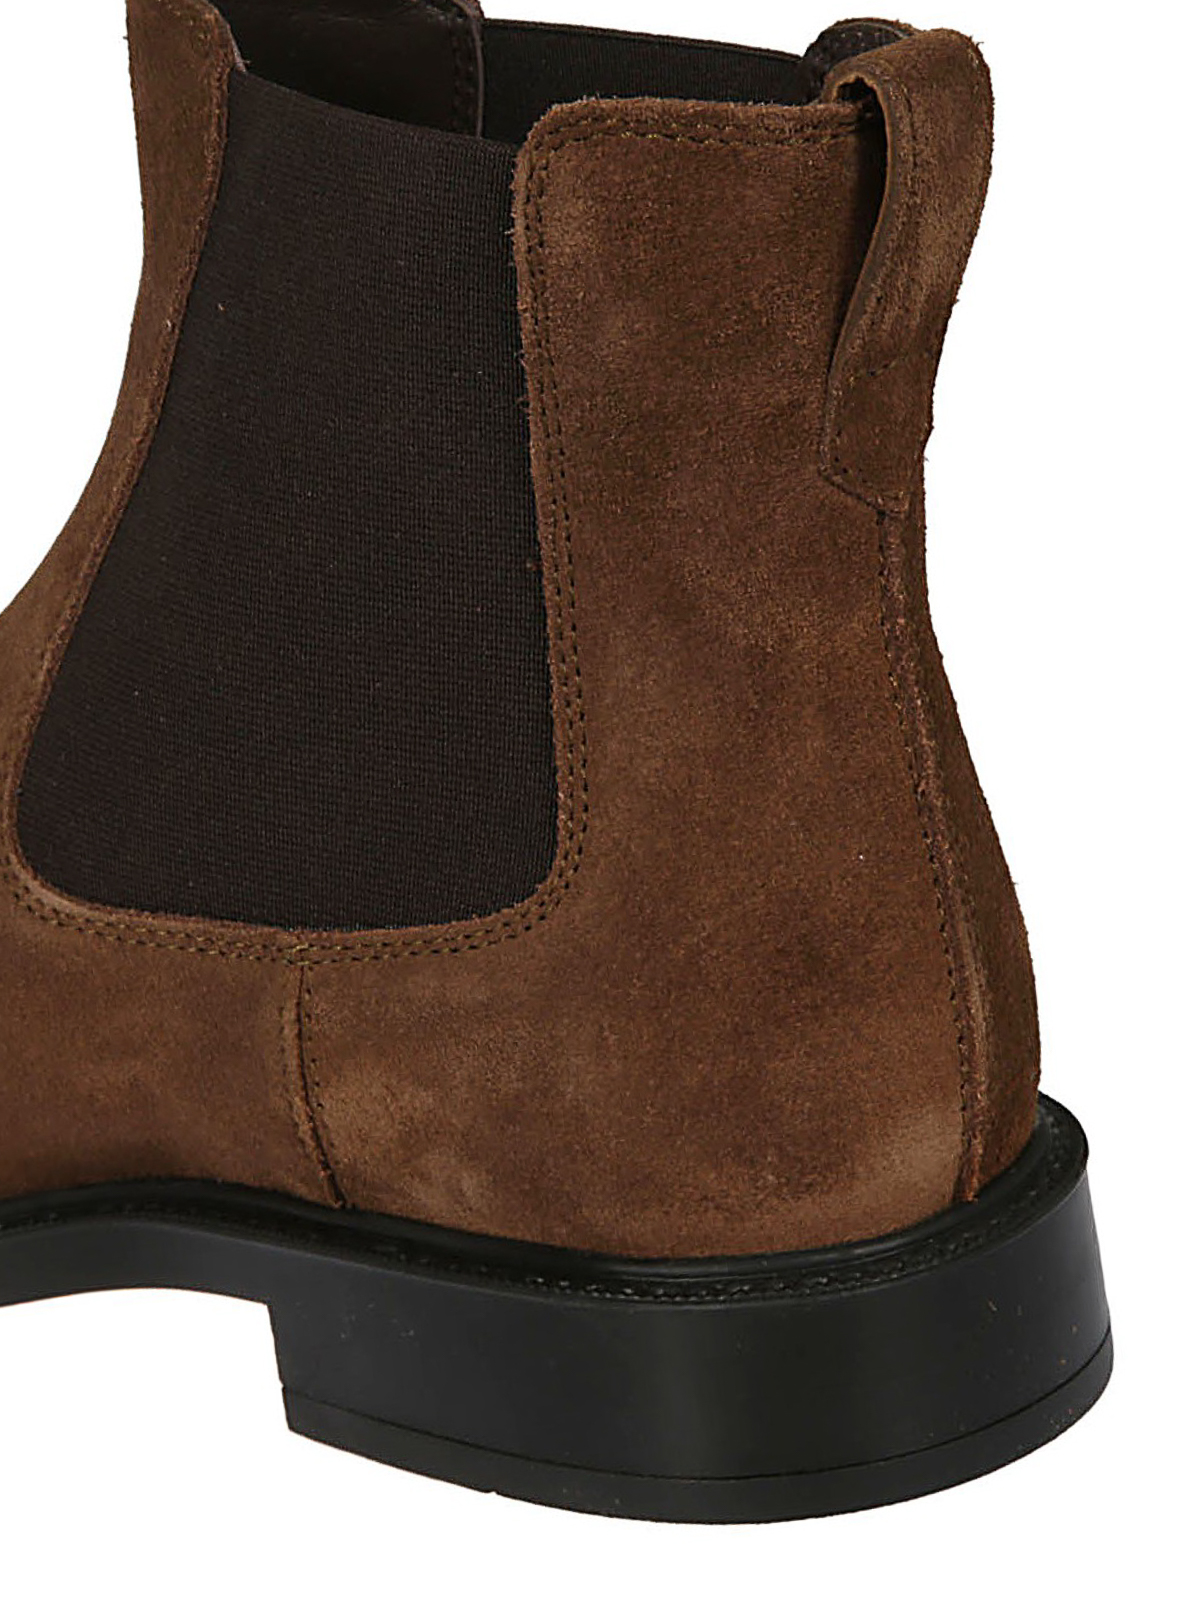 Suede ankle boots with rubber sole 